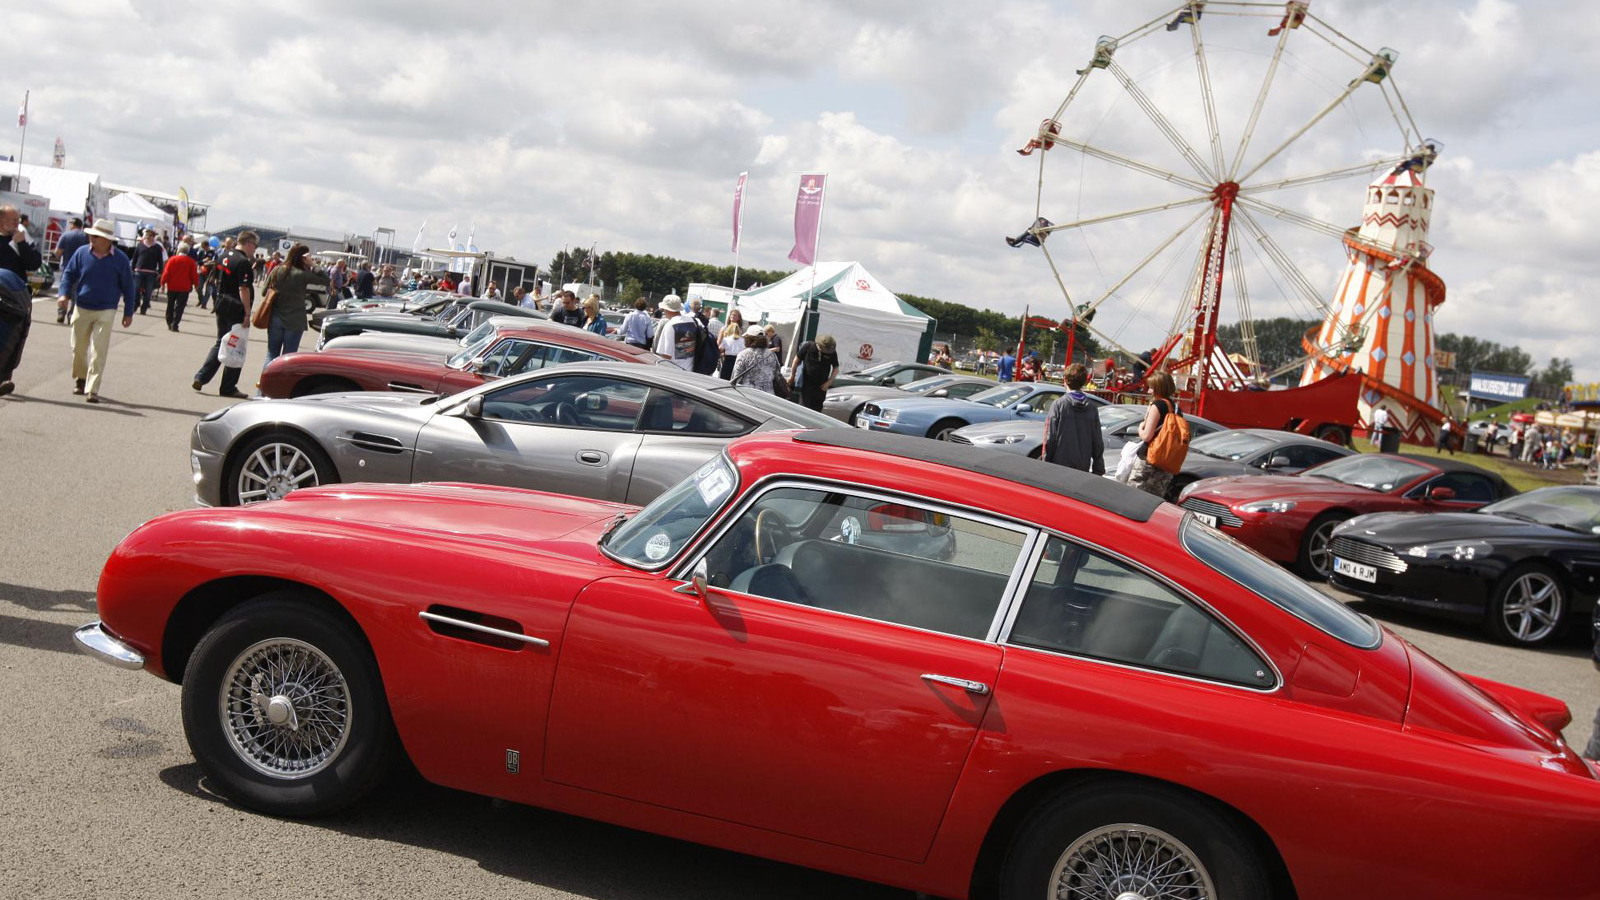 Classic Aston Martins at the Silverstone circuit